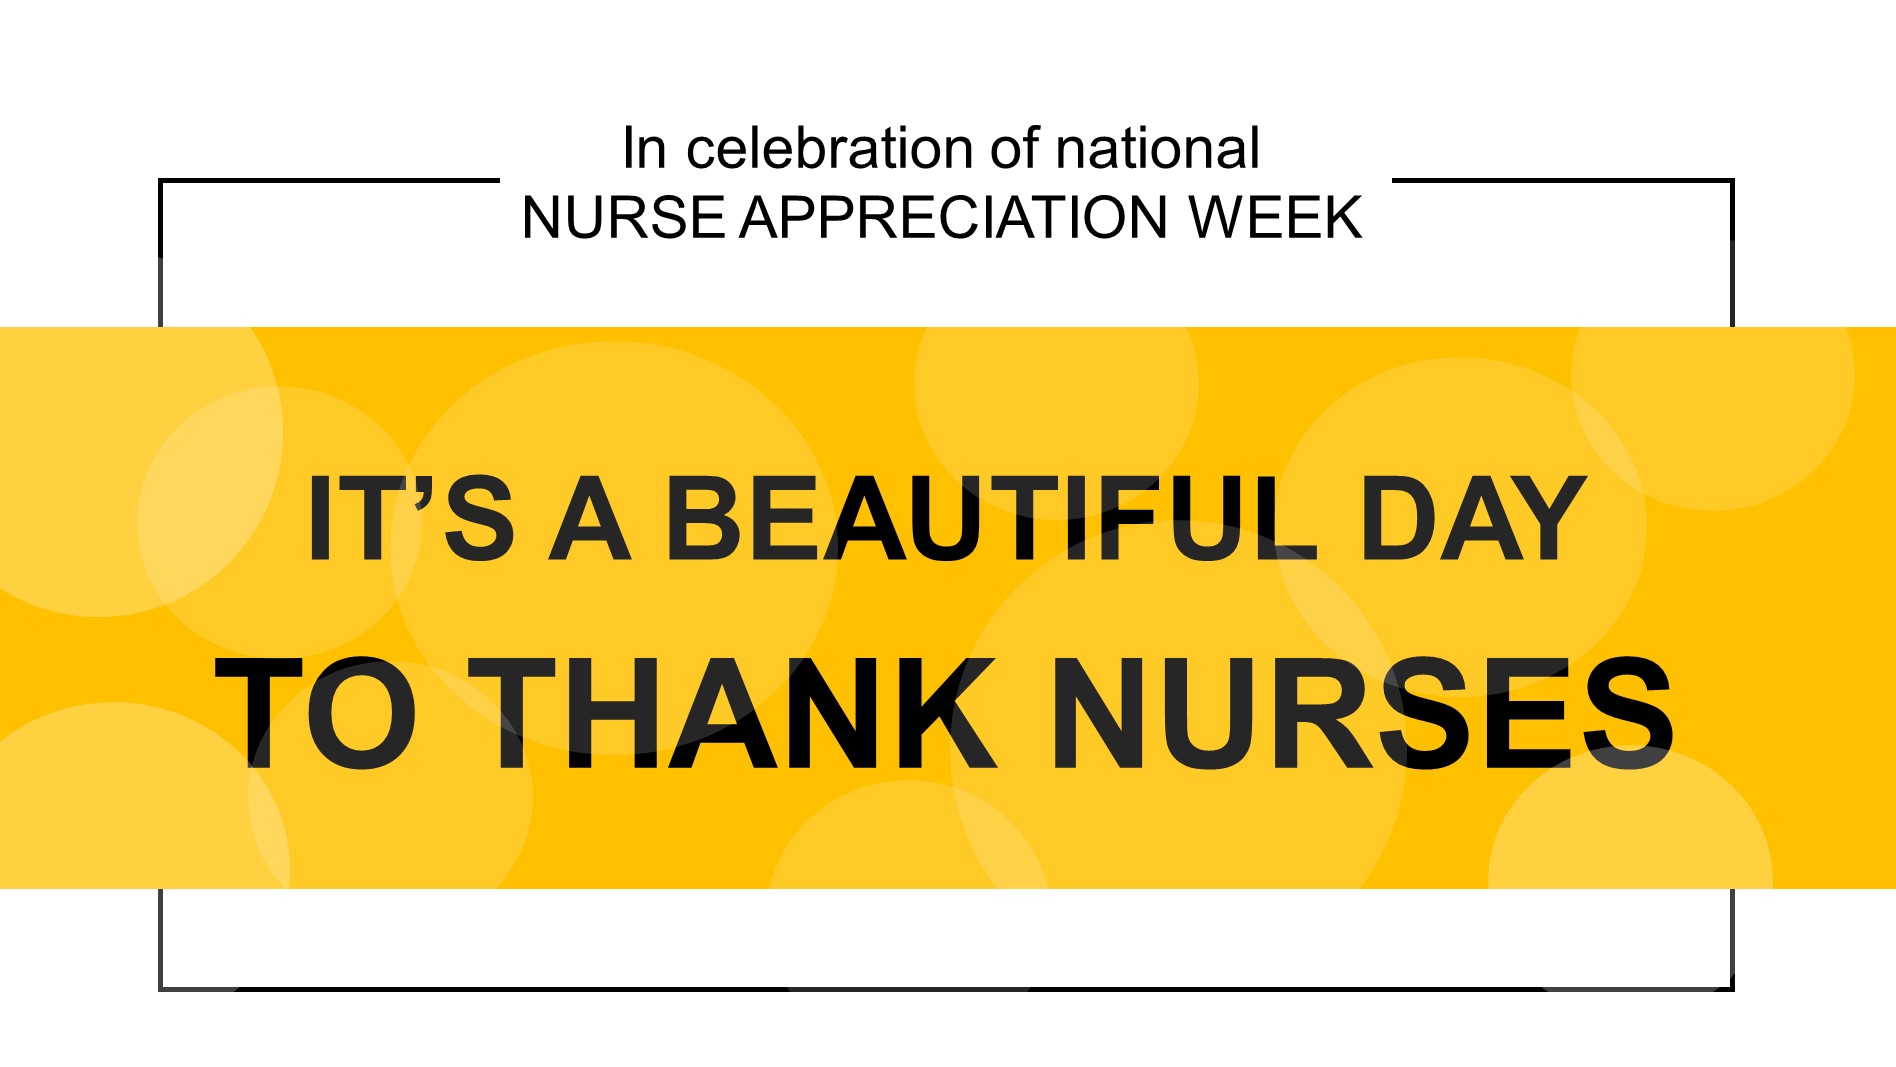 It's a beautiful day to thank nurses